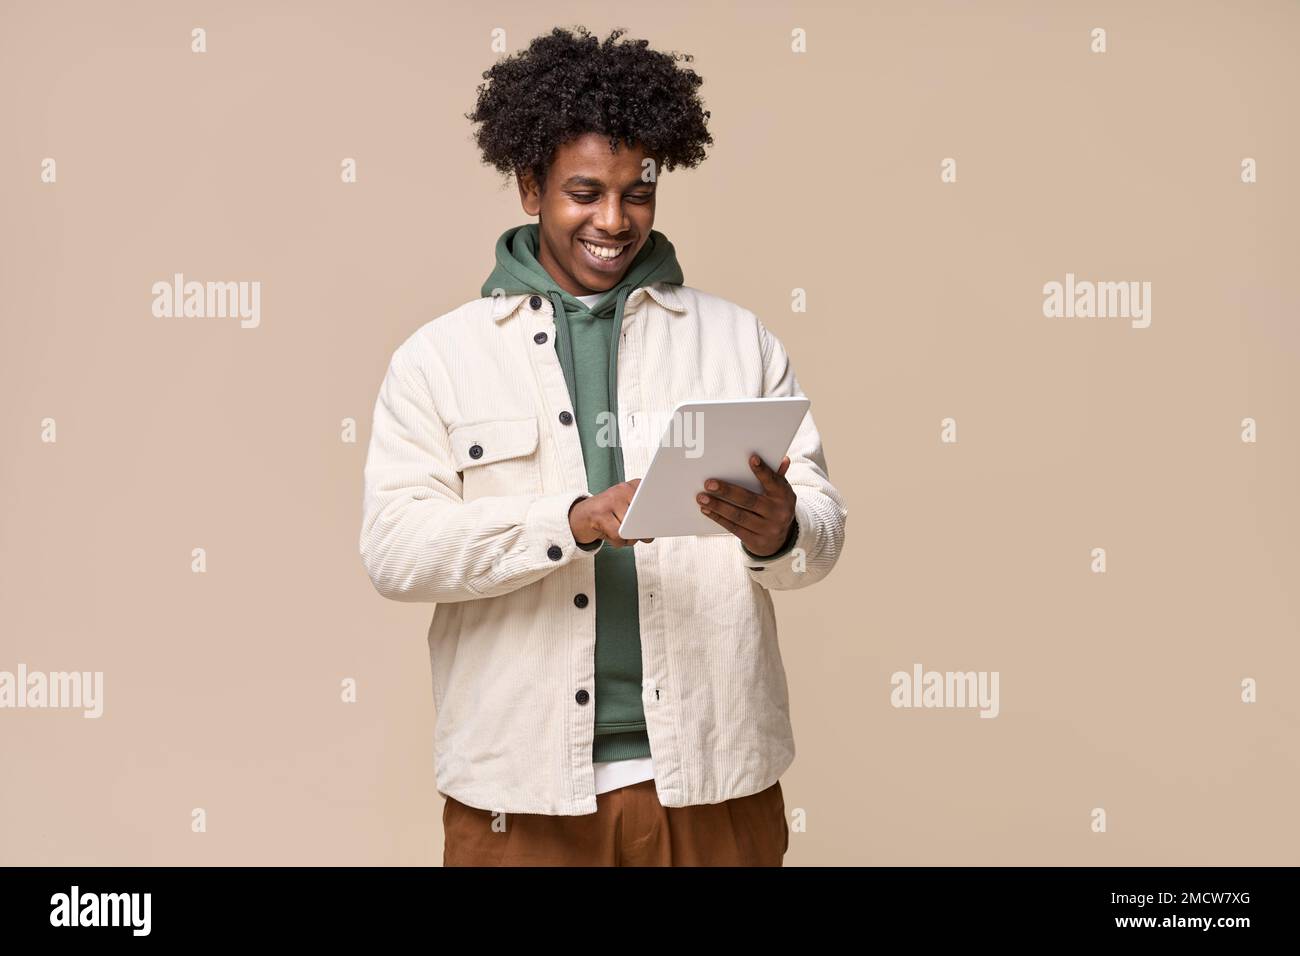 Happy African teenager holding using tablet isolated on beige background. Stock Photo